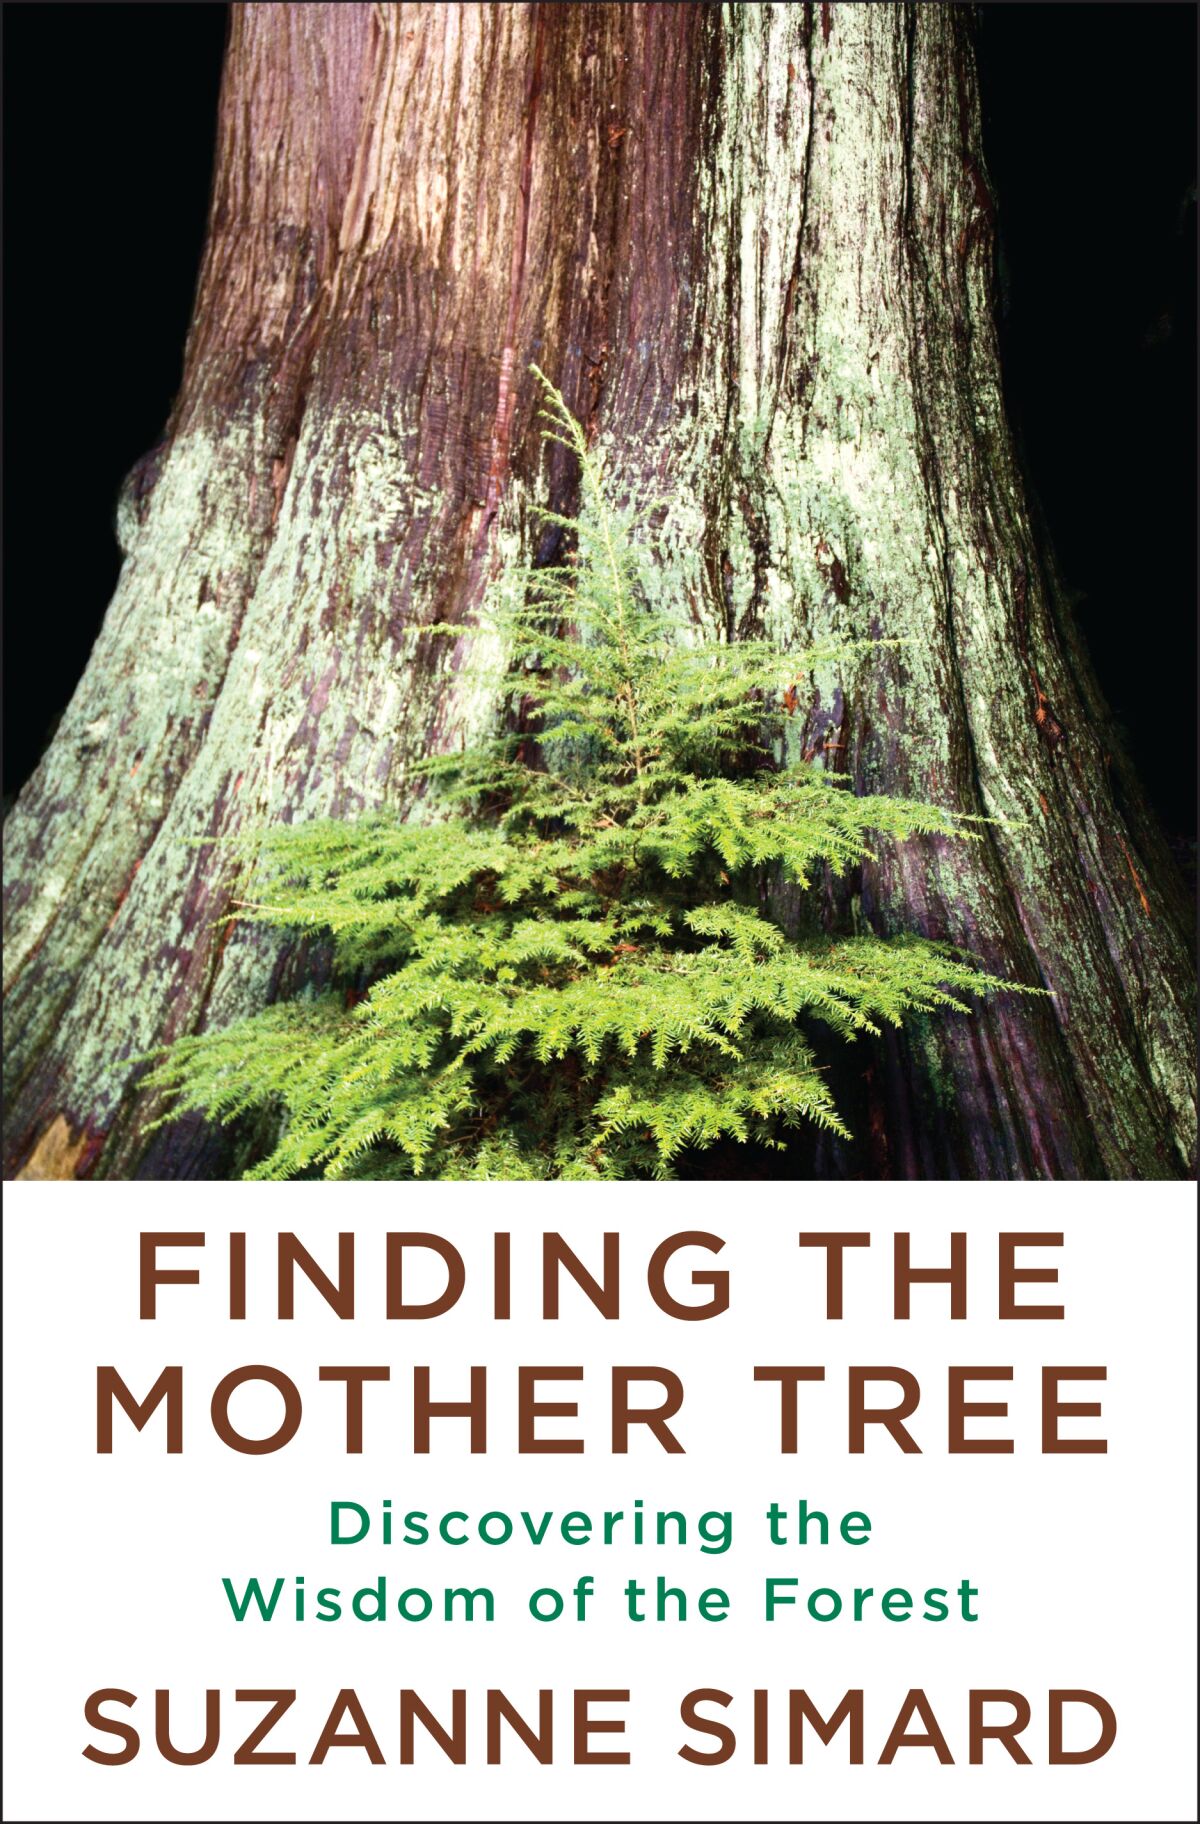 "Finding the Mother Tree," by Suzanne Simard